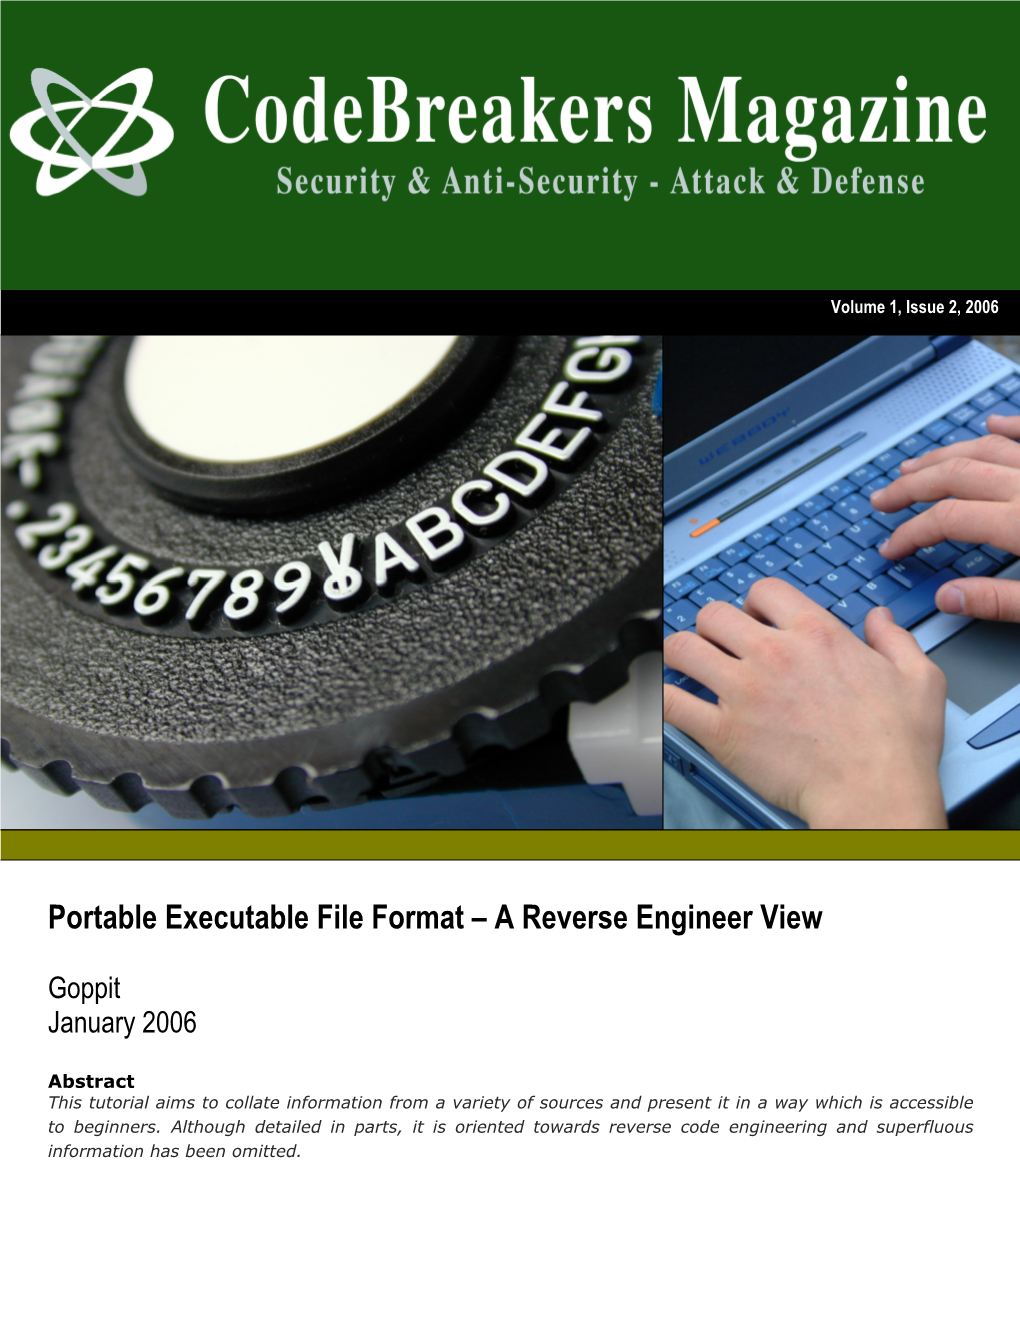 Portable Executable File Format – a Reverse Engineer View